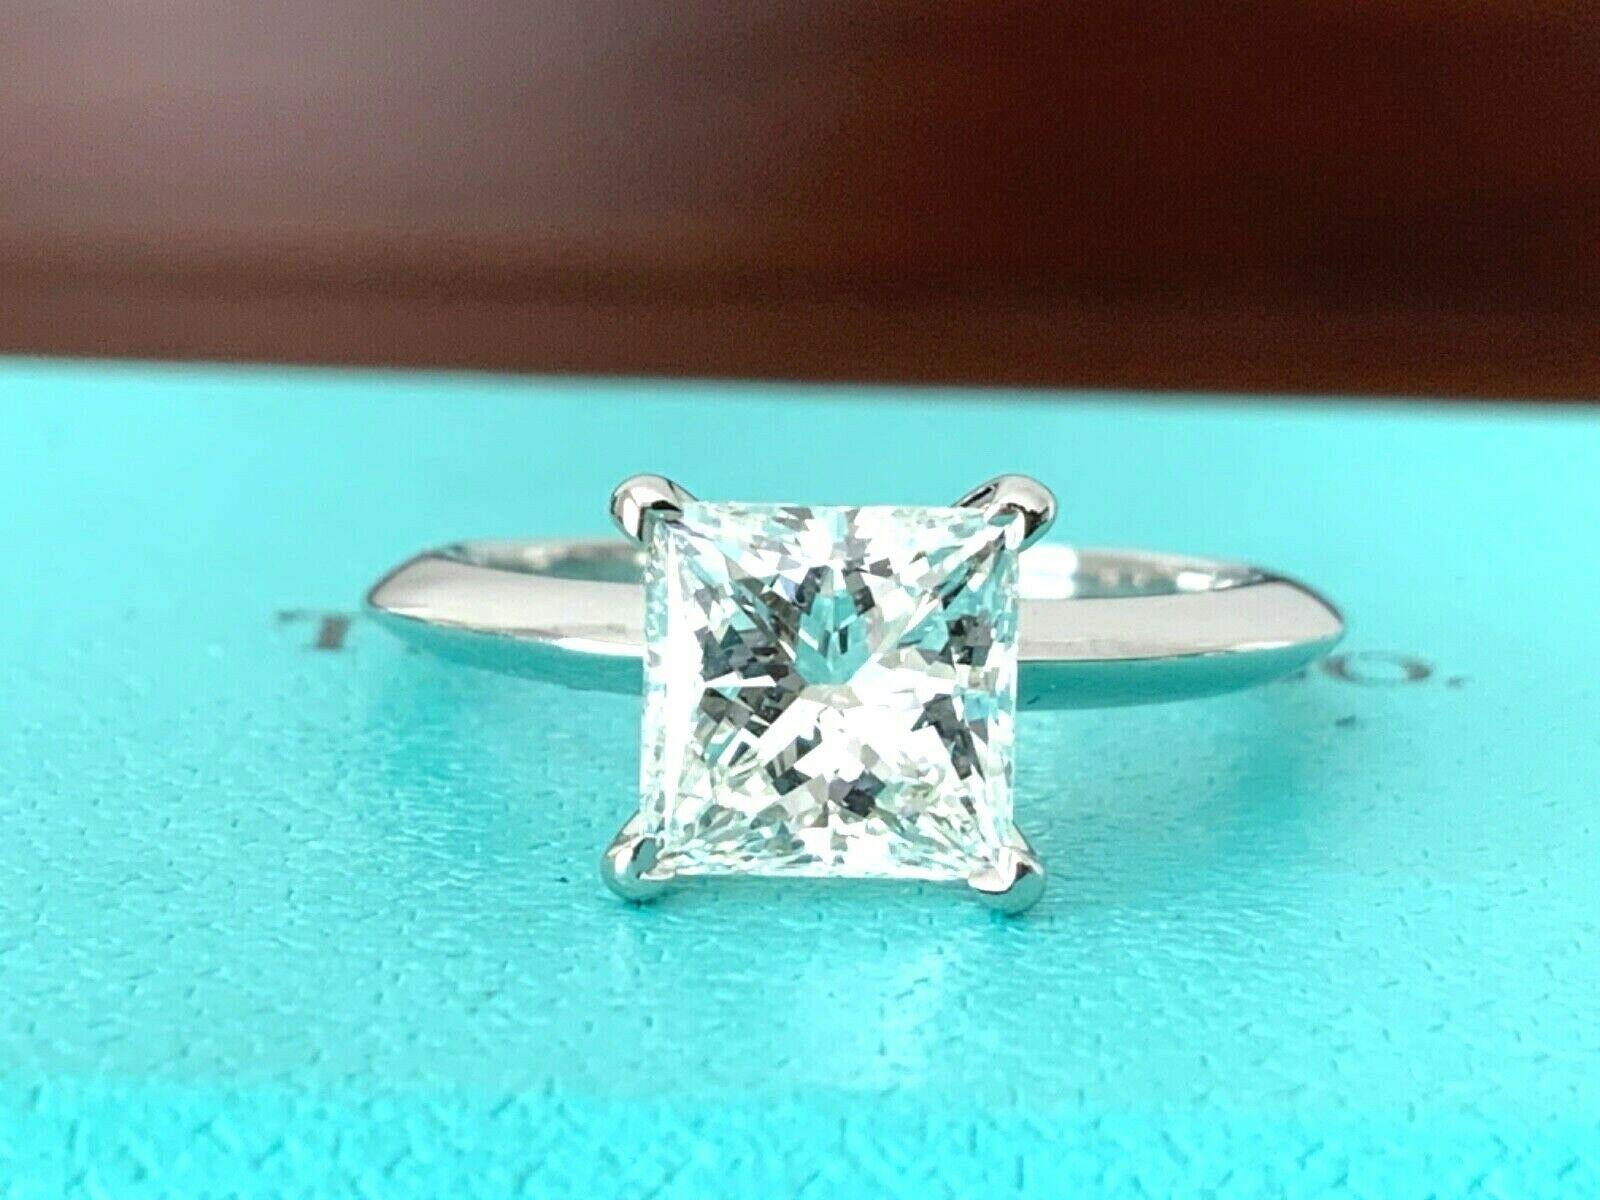 For your consideration is a stunning LARGE CARAT INVESTMENT GRADE H Color VS1 Clarity Tiffany & Co Princess cut 1.71 carat natural diamond solitaire.  The ring shows like a brand new ring with no marks, scratches or nicks.  
This amazing ring